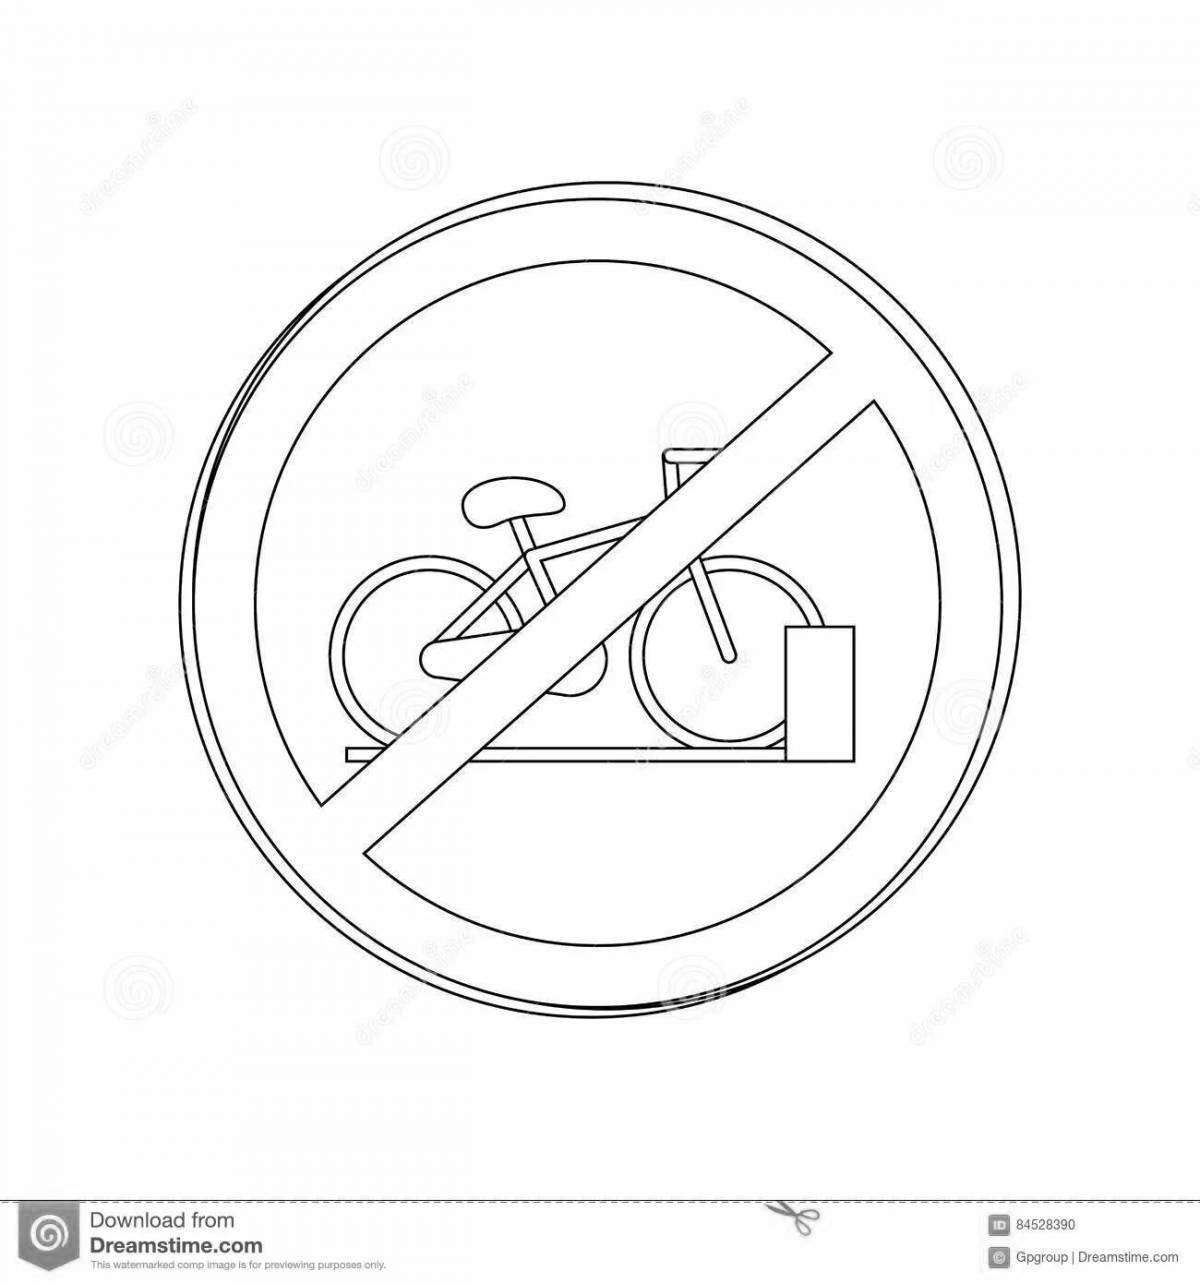 Coloring page wonderful prohibitory road sign